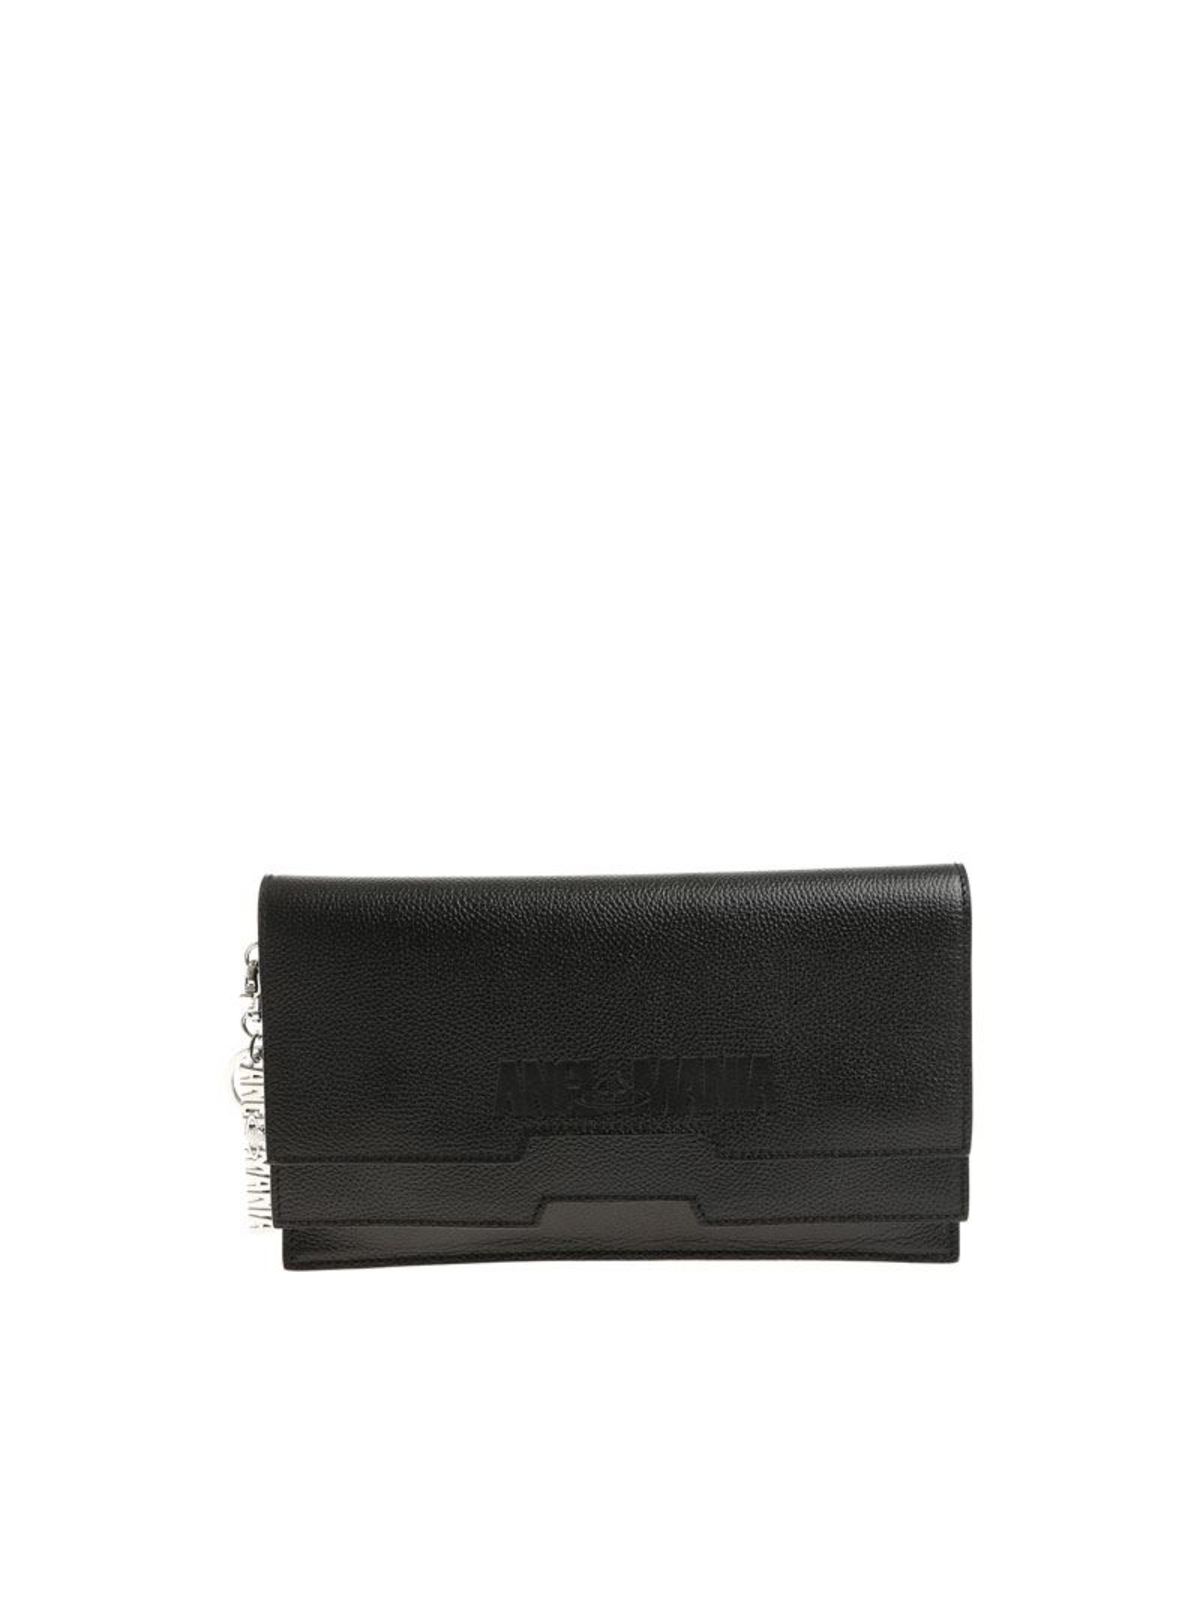 Vivienne Westwood Anglomania Hammered Leather Clutch In Negro